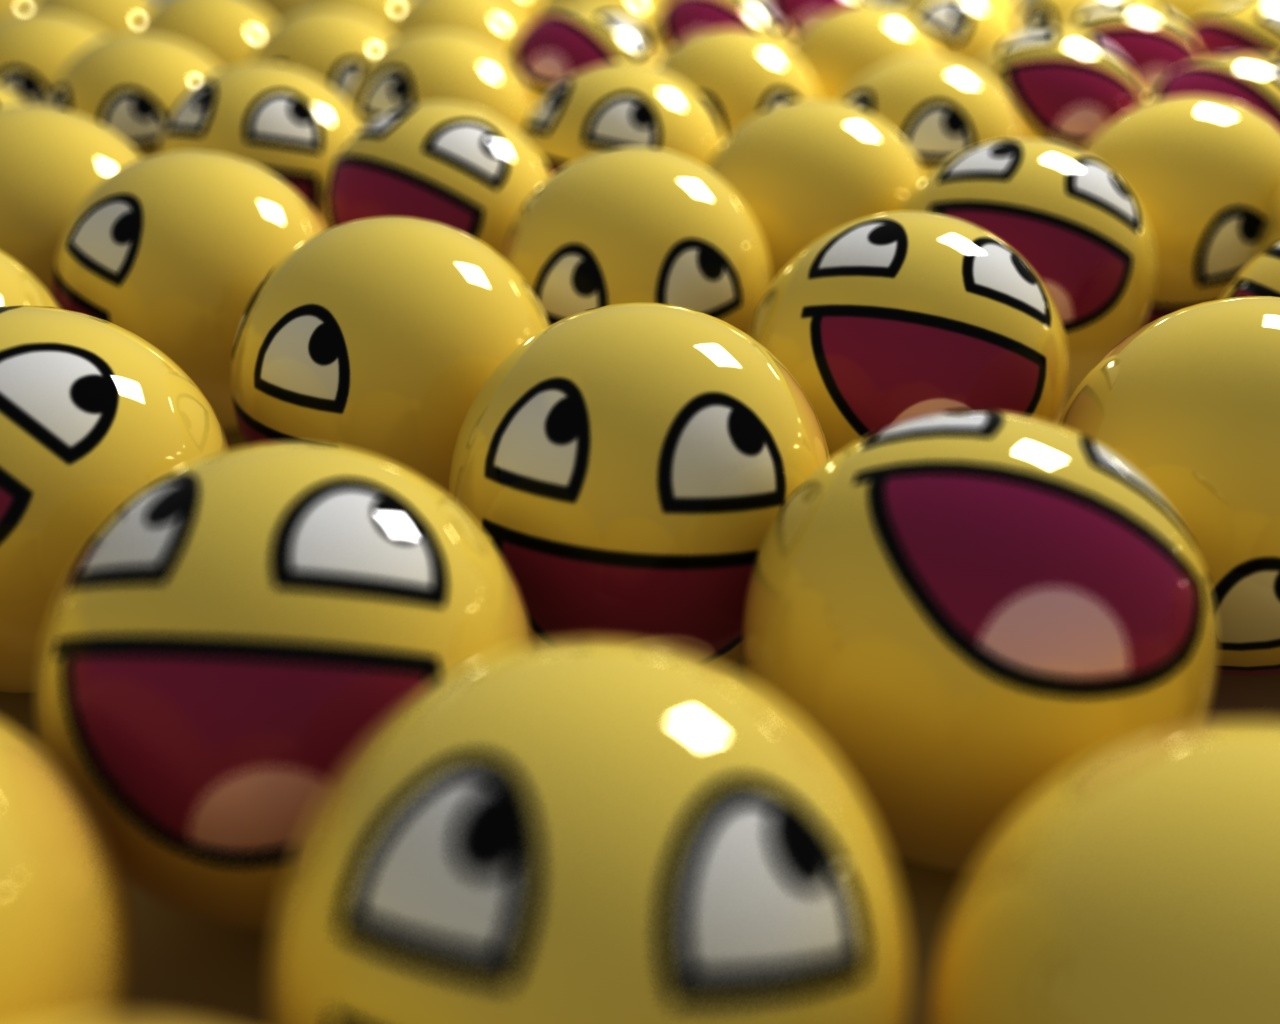 Awesome Face Smiley Render CGi Balls 1280x1024